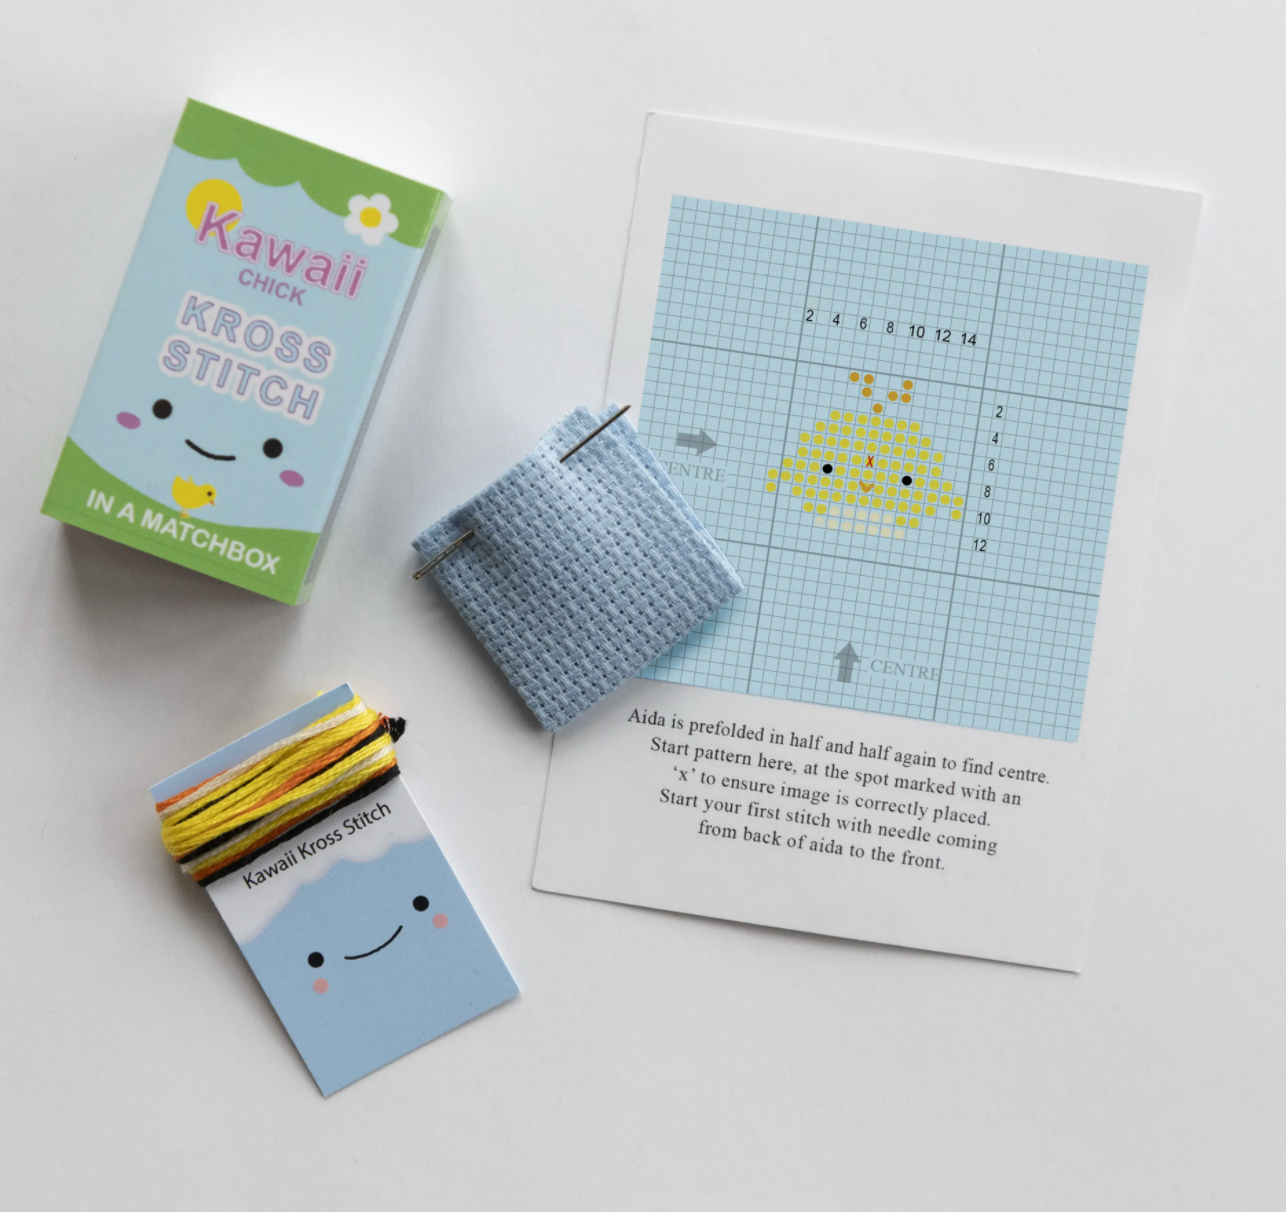 Load image into Gallery viewer, Kawaii Chick Mini Cross Stitch Kit In A Matchbox
